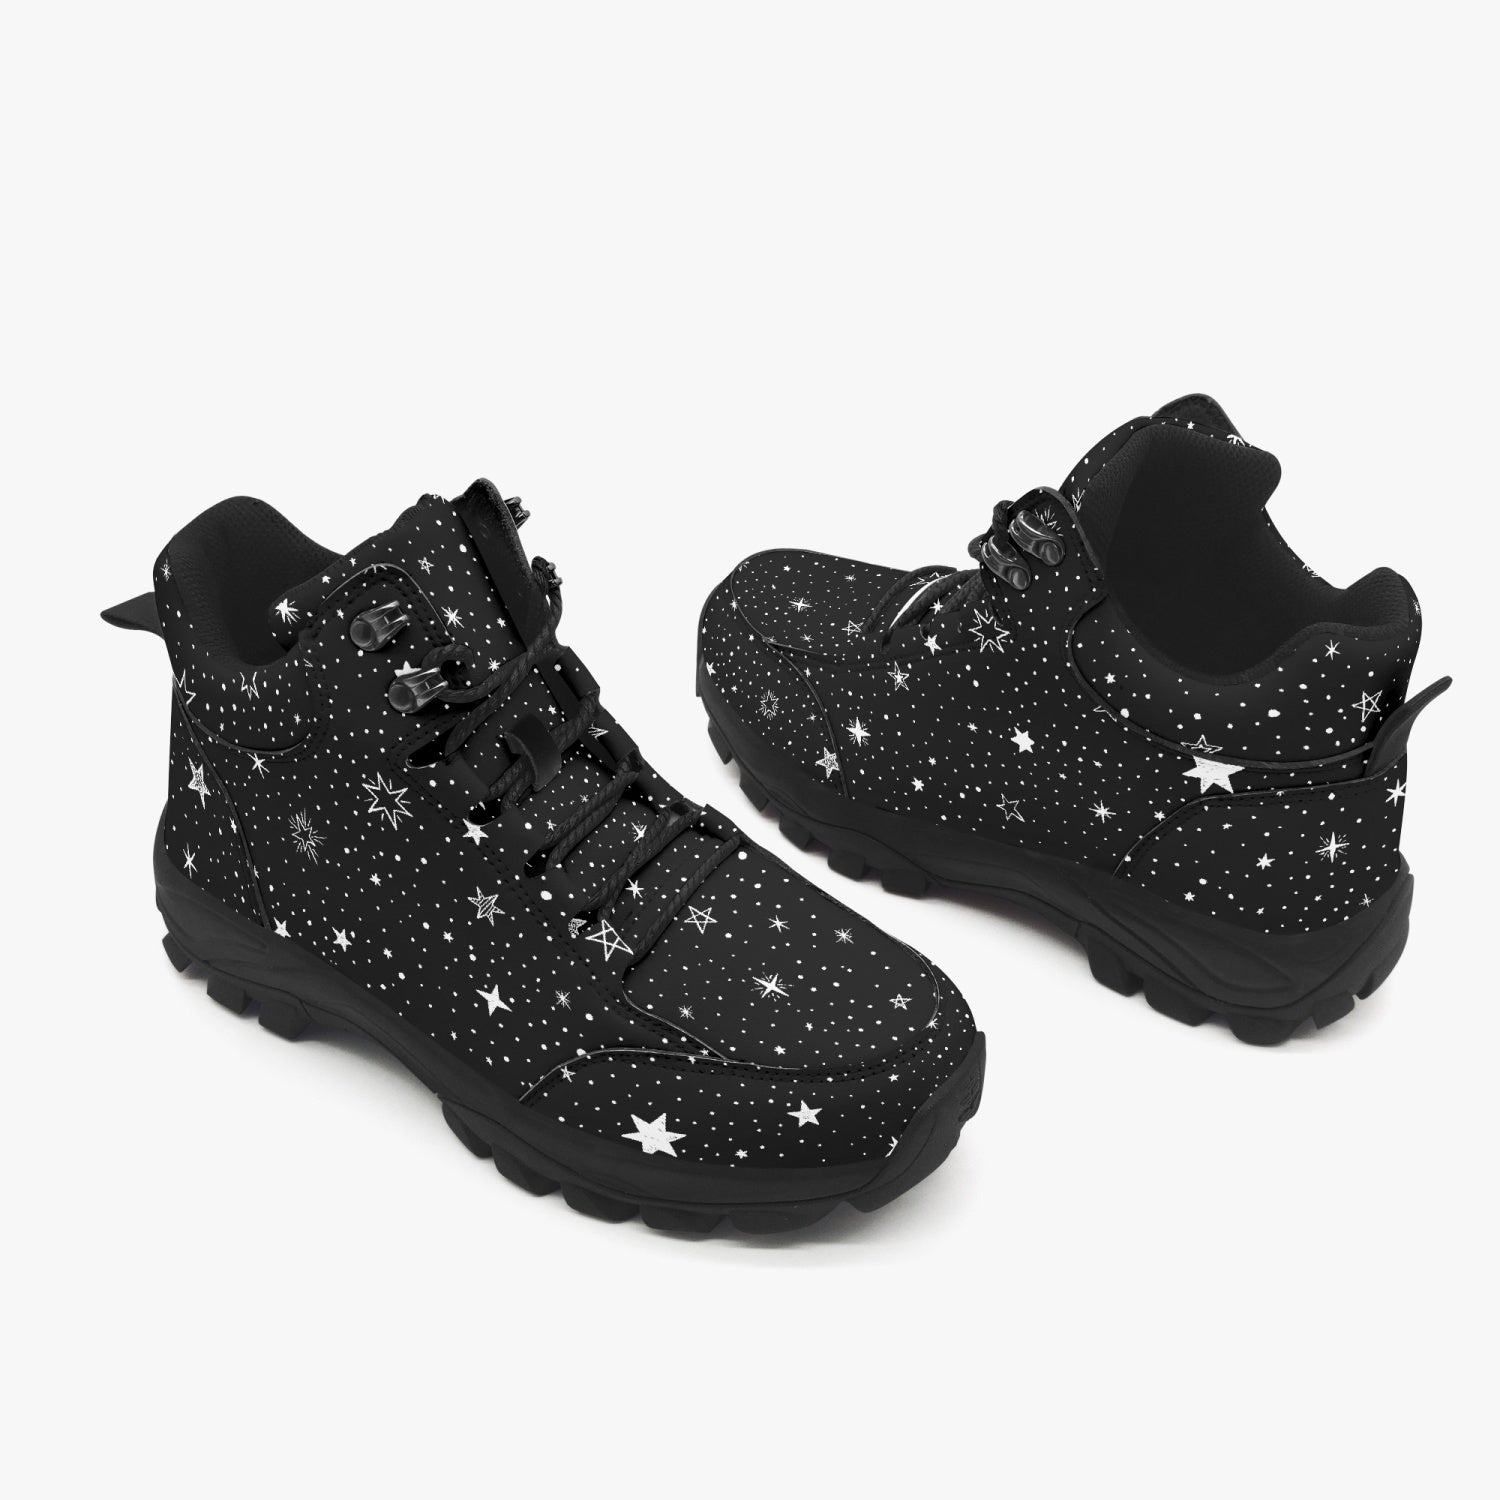 Stars Hiking Leather Boots, Space Black White Print Men Women Female Lace Up Walking Hunting Rubber Shoes Print Ankle Winter Casual Work Starcove Fashion